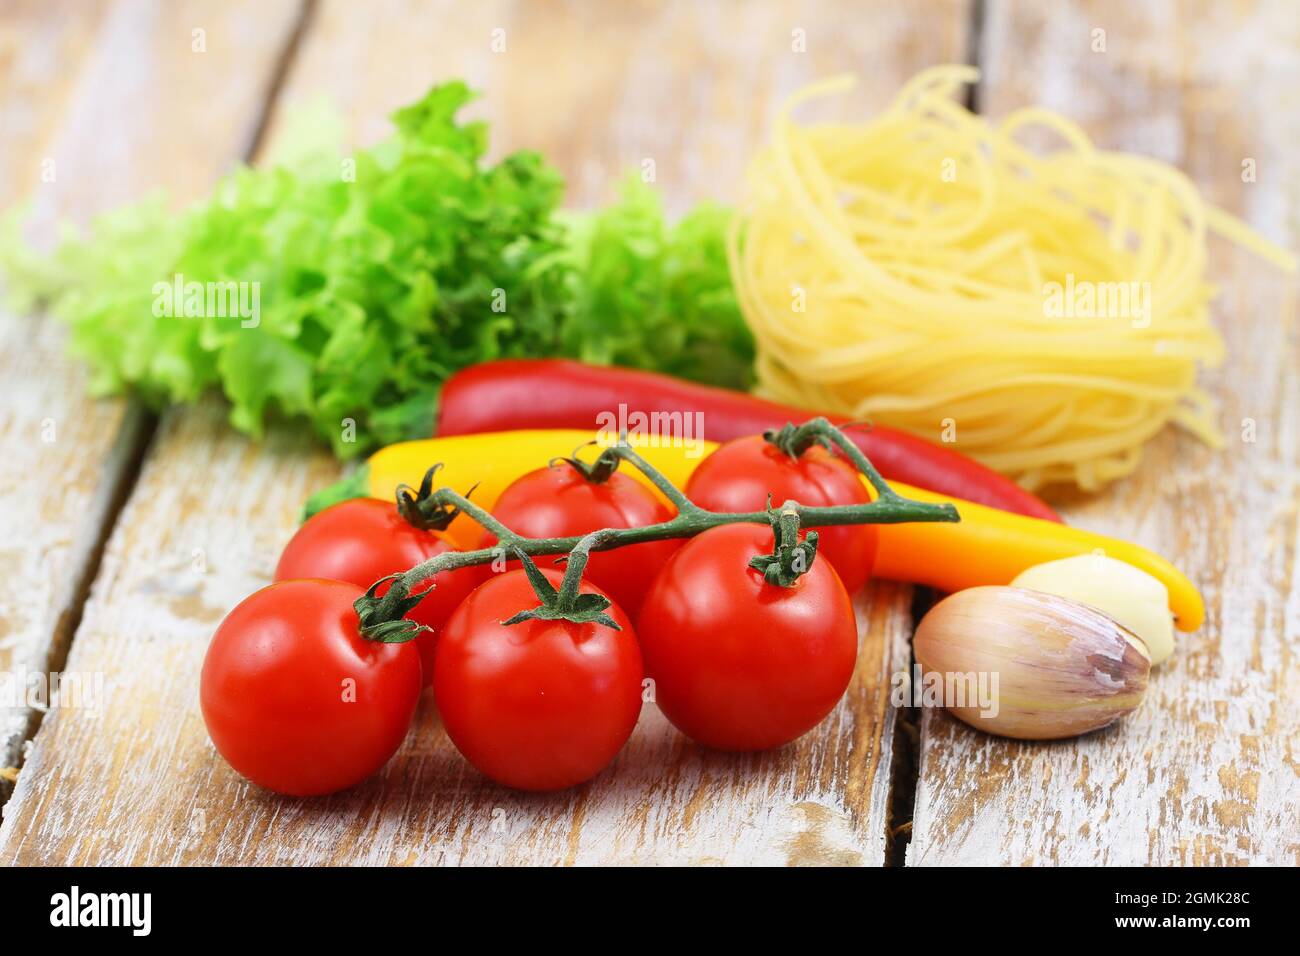 Selection of cooking ingredients: tagliatelle, cherry tomatoes, garlic cloves and chilies on woodenrustic surface Stock Photo